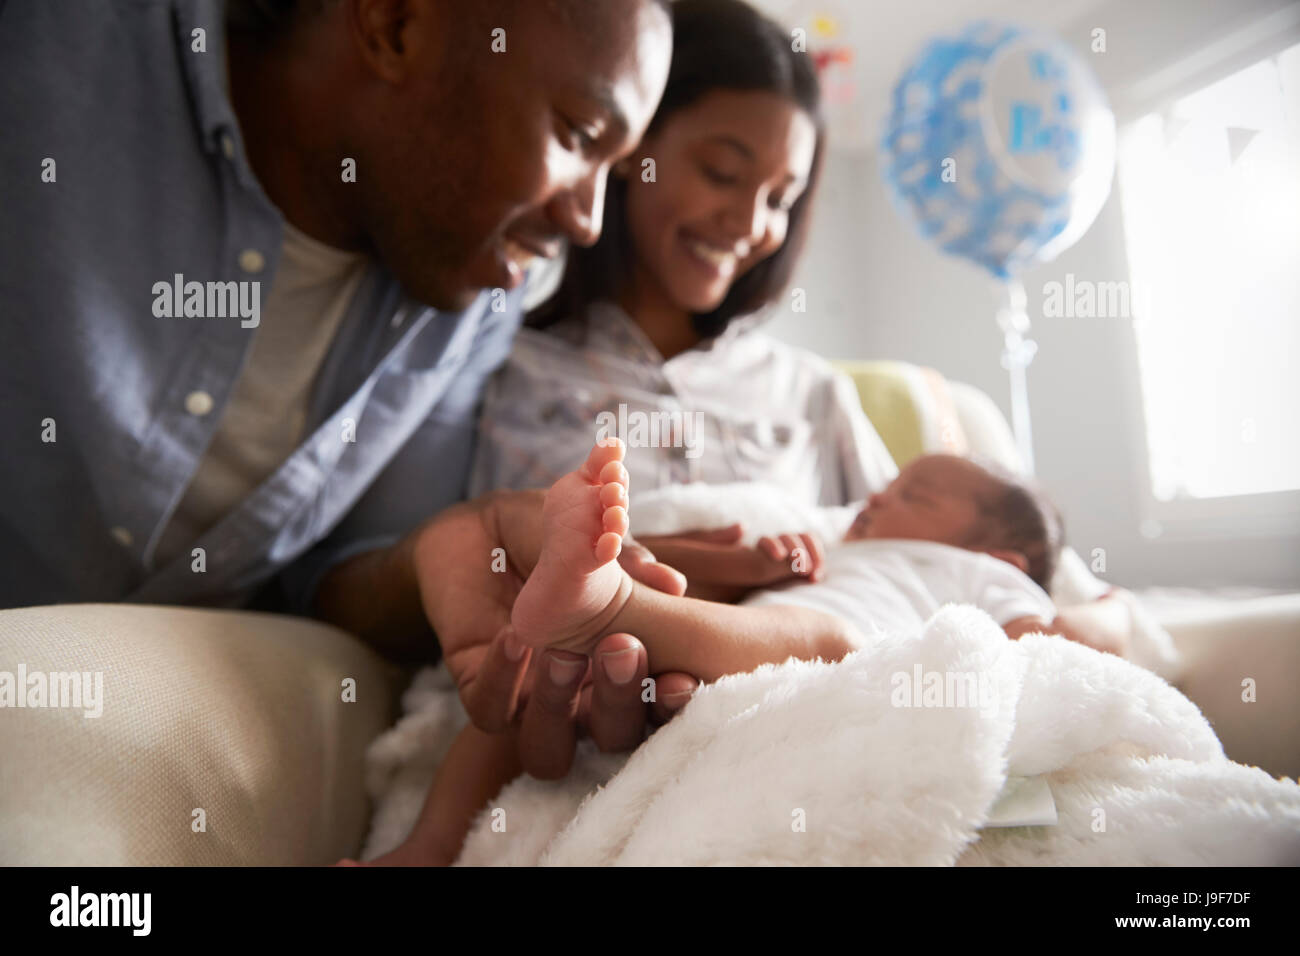 Parents Home From Hospital With Newborn Baby Stock Photo